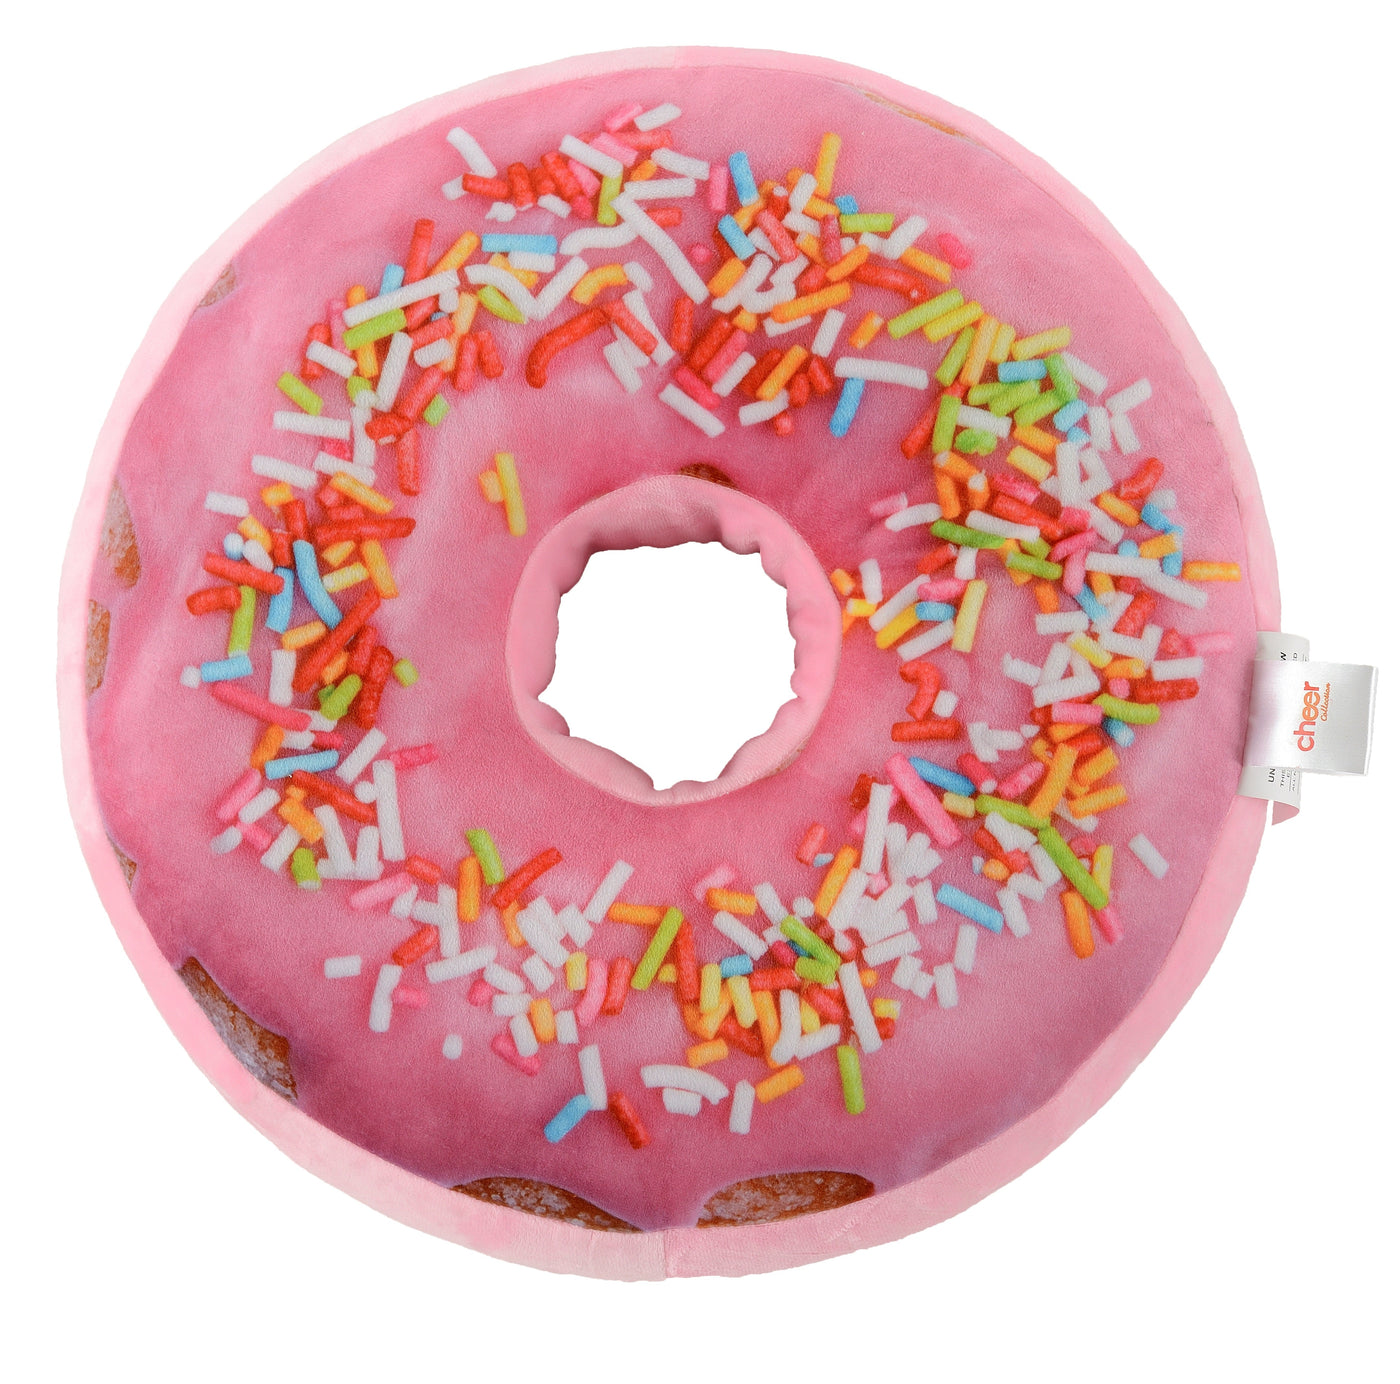 Cheer Collection Round Donut Pillow - White